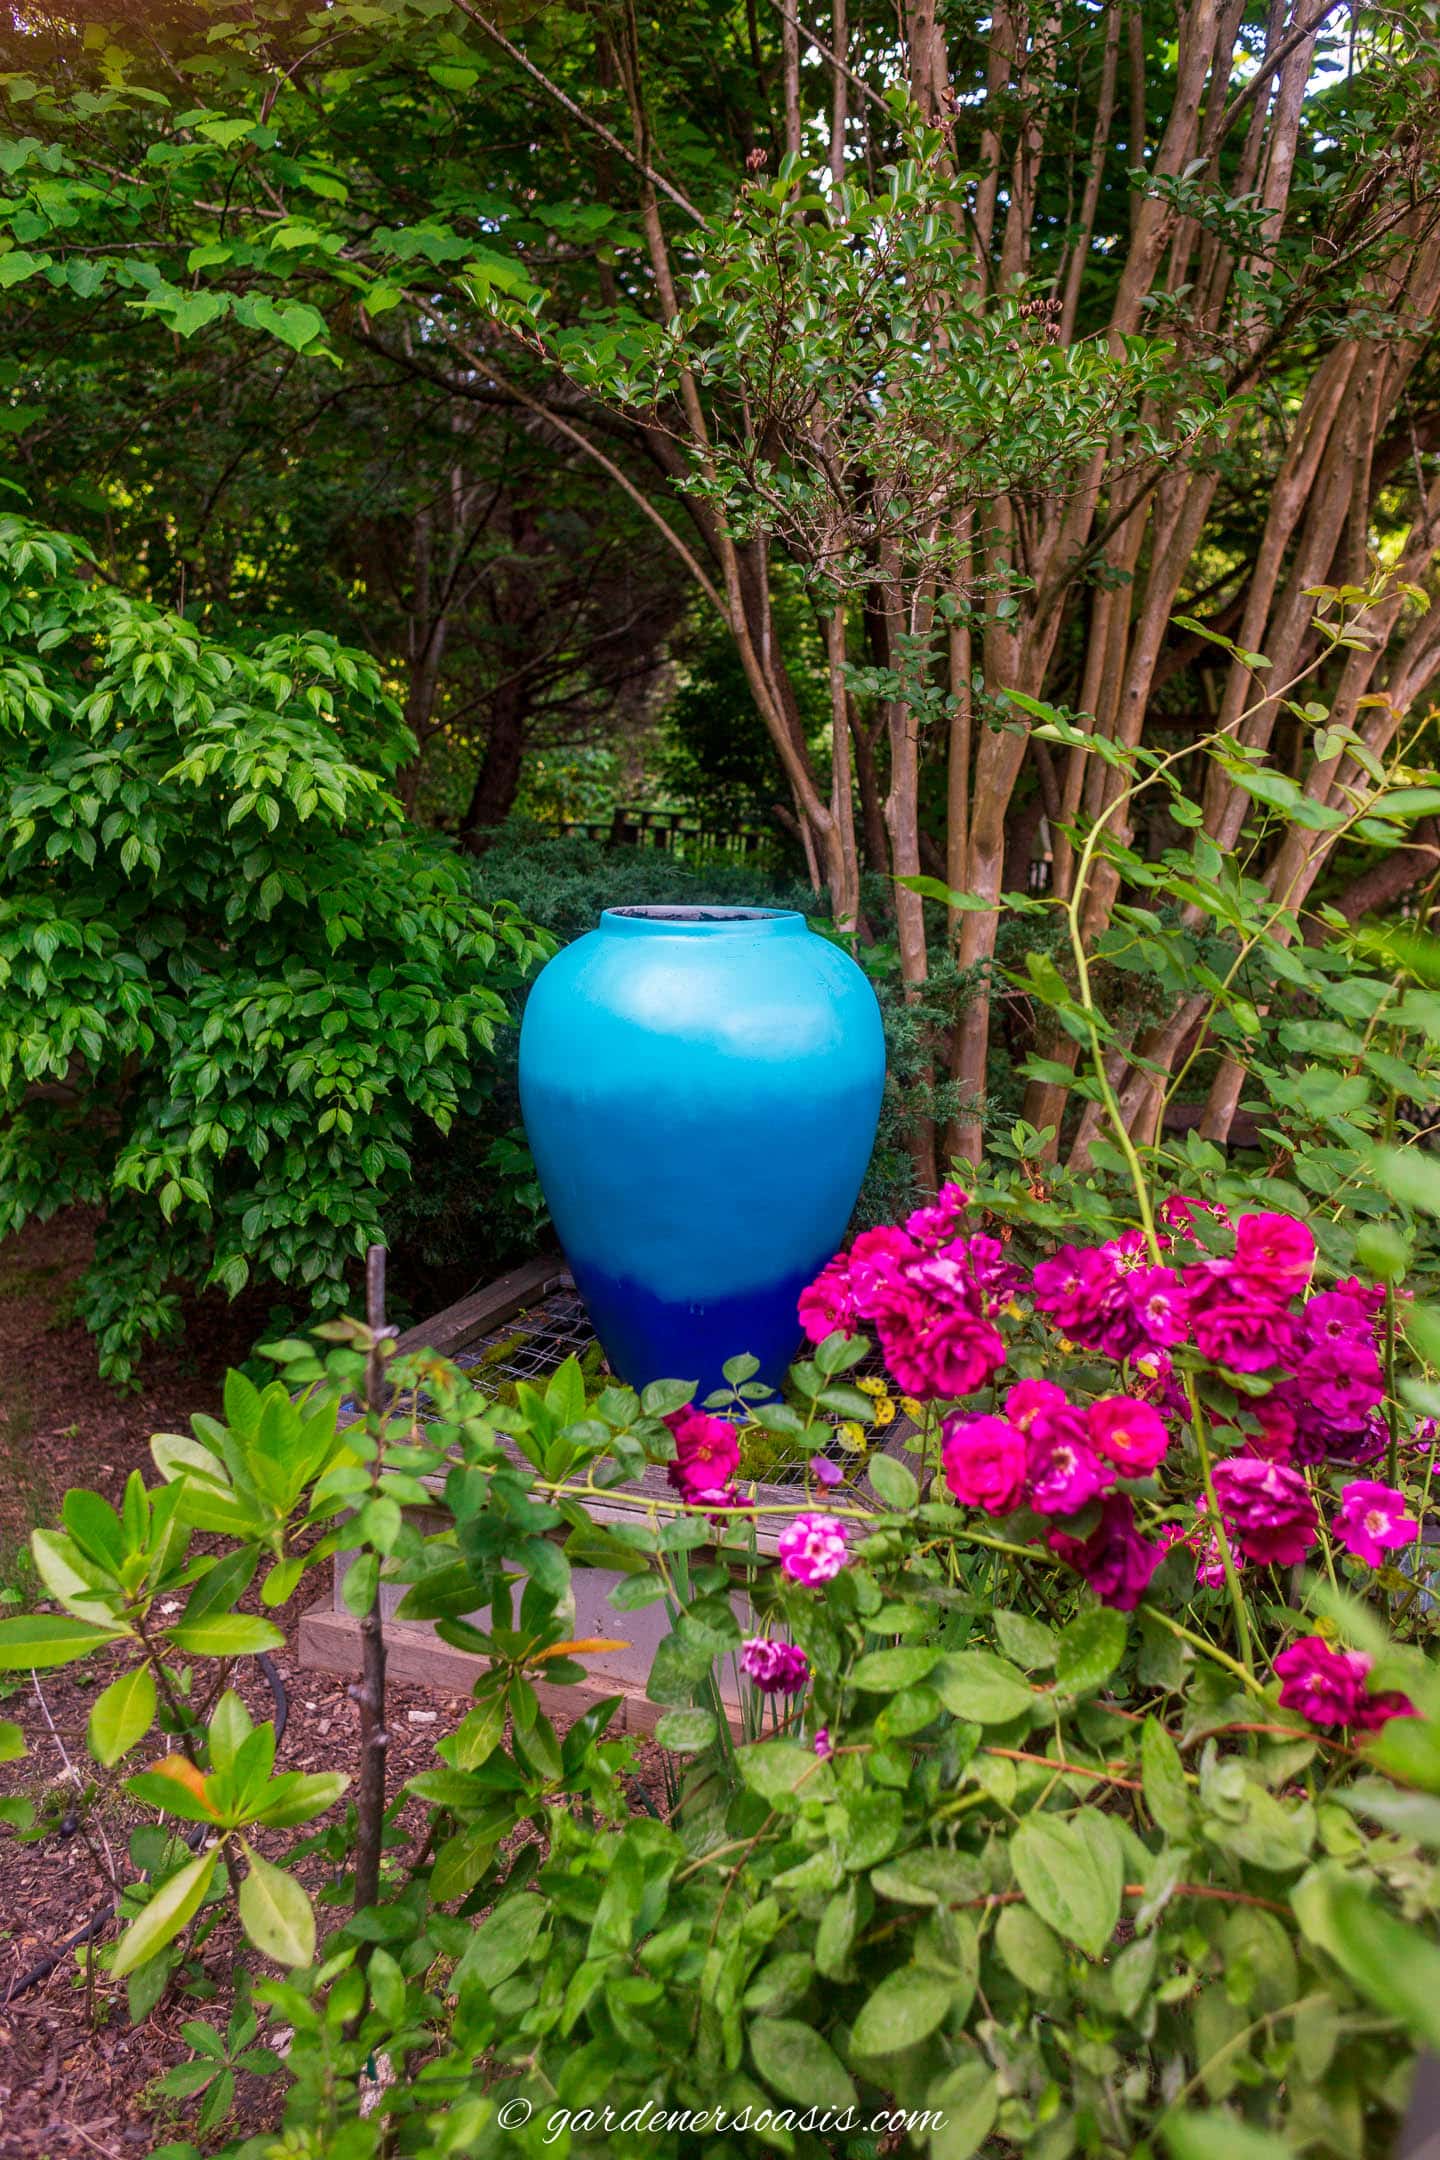 Large blue urn on a pedestal surrounded by trees and plants